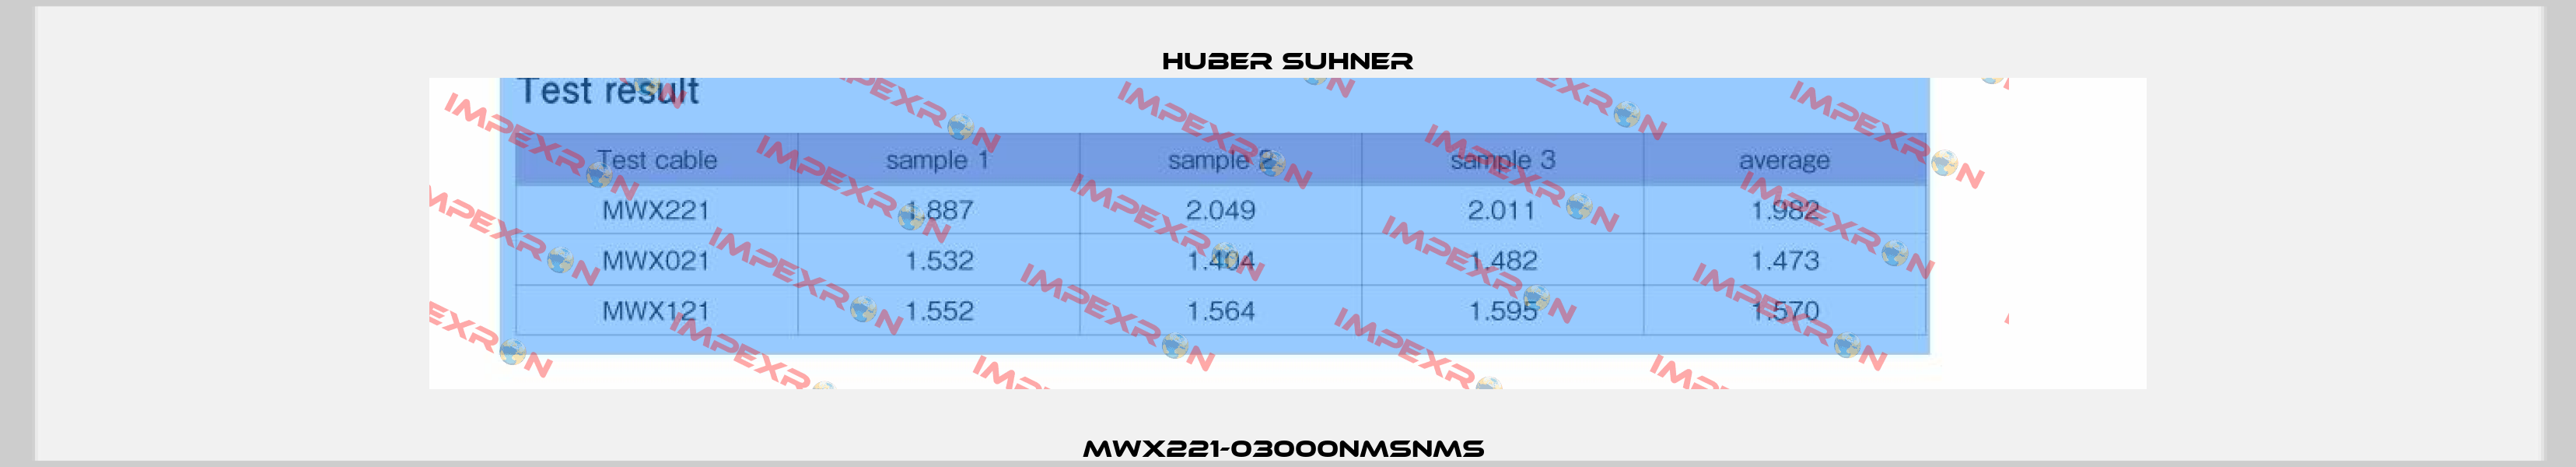 MWX221-03000NMSNMS  Huber Suhner